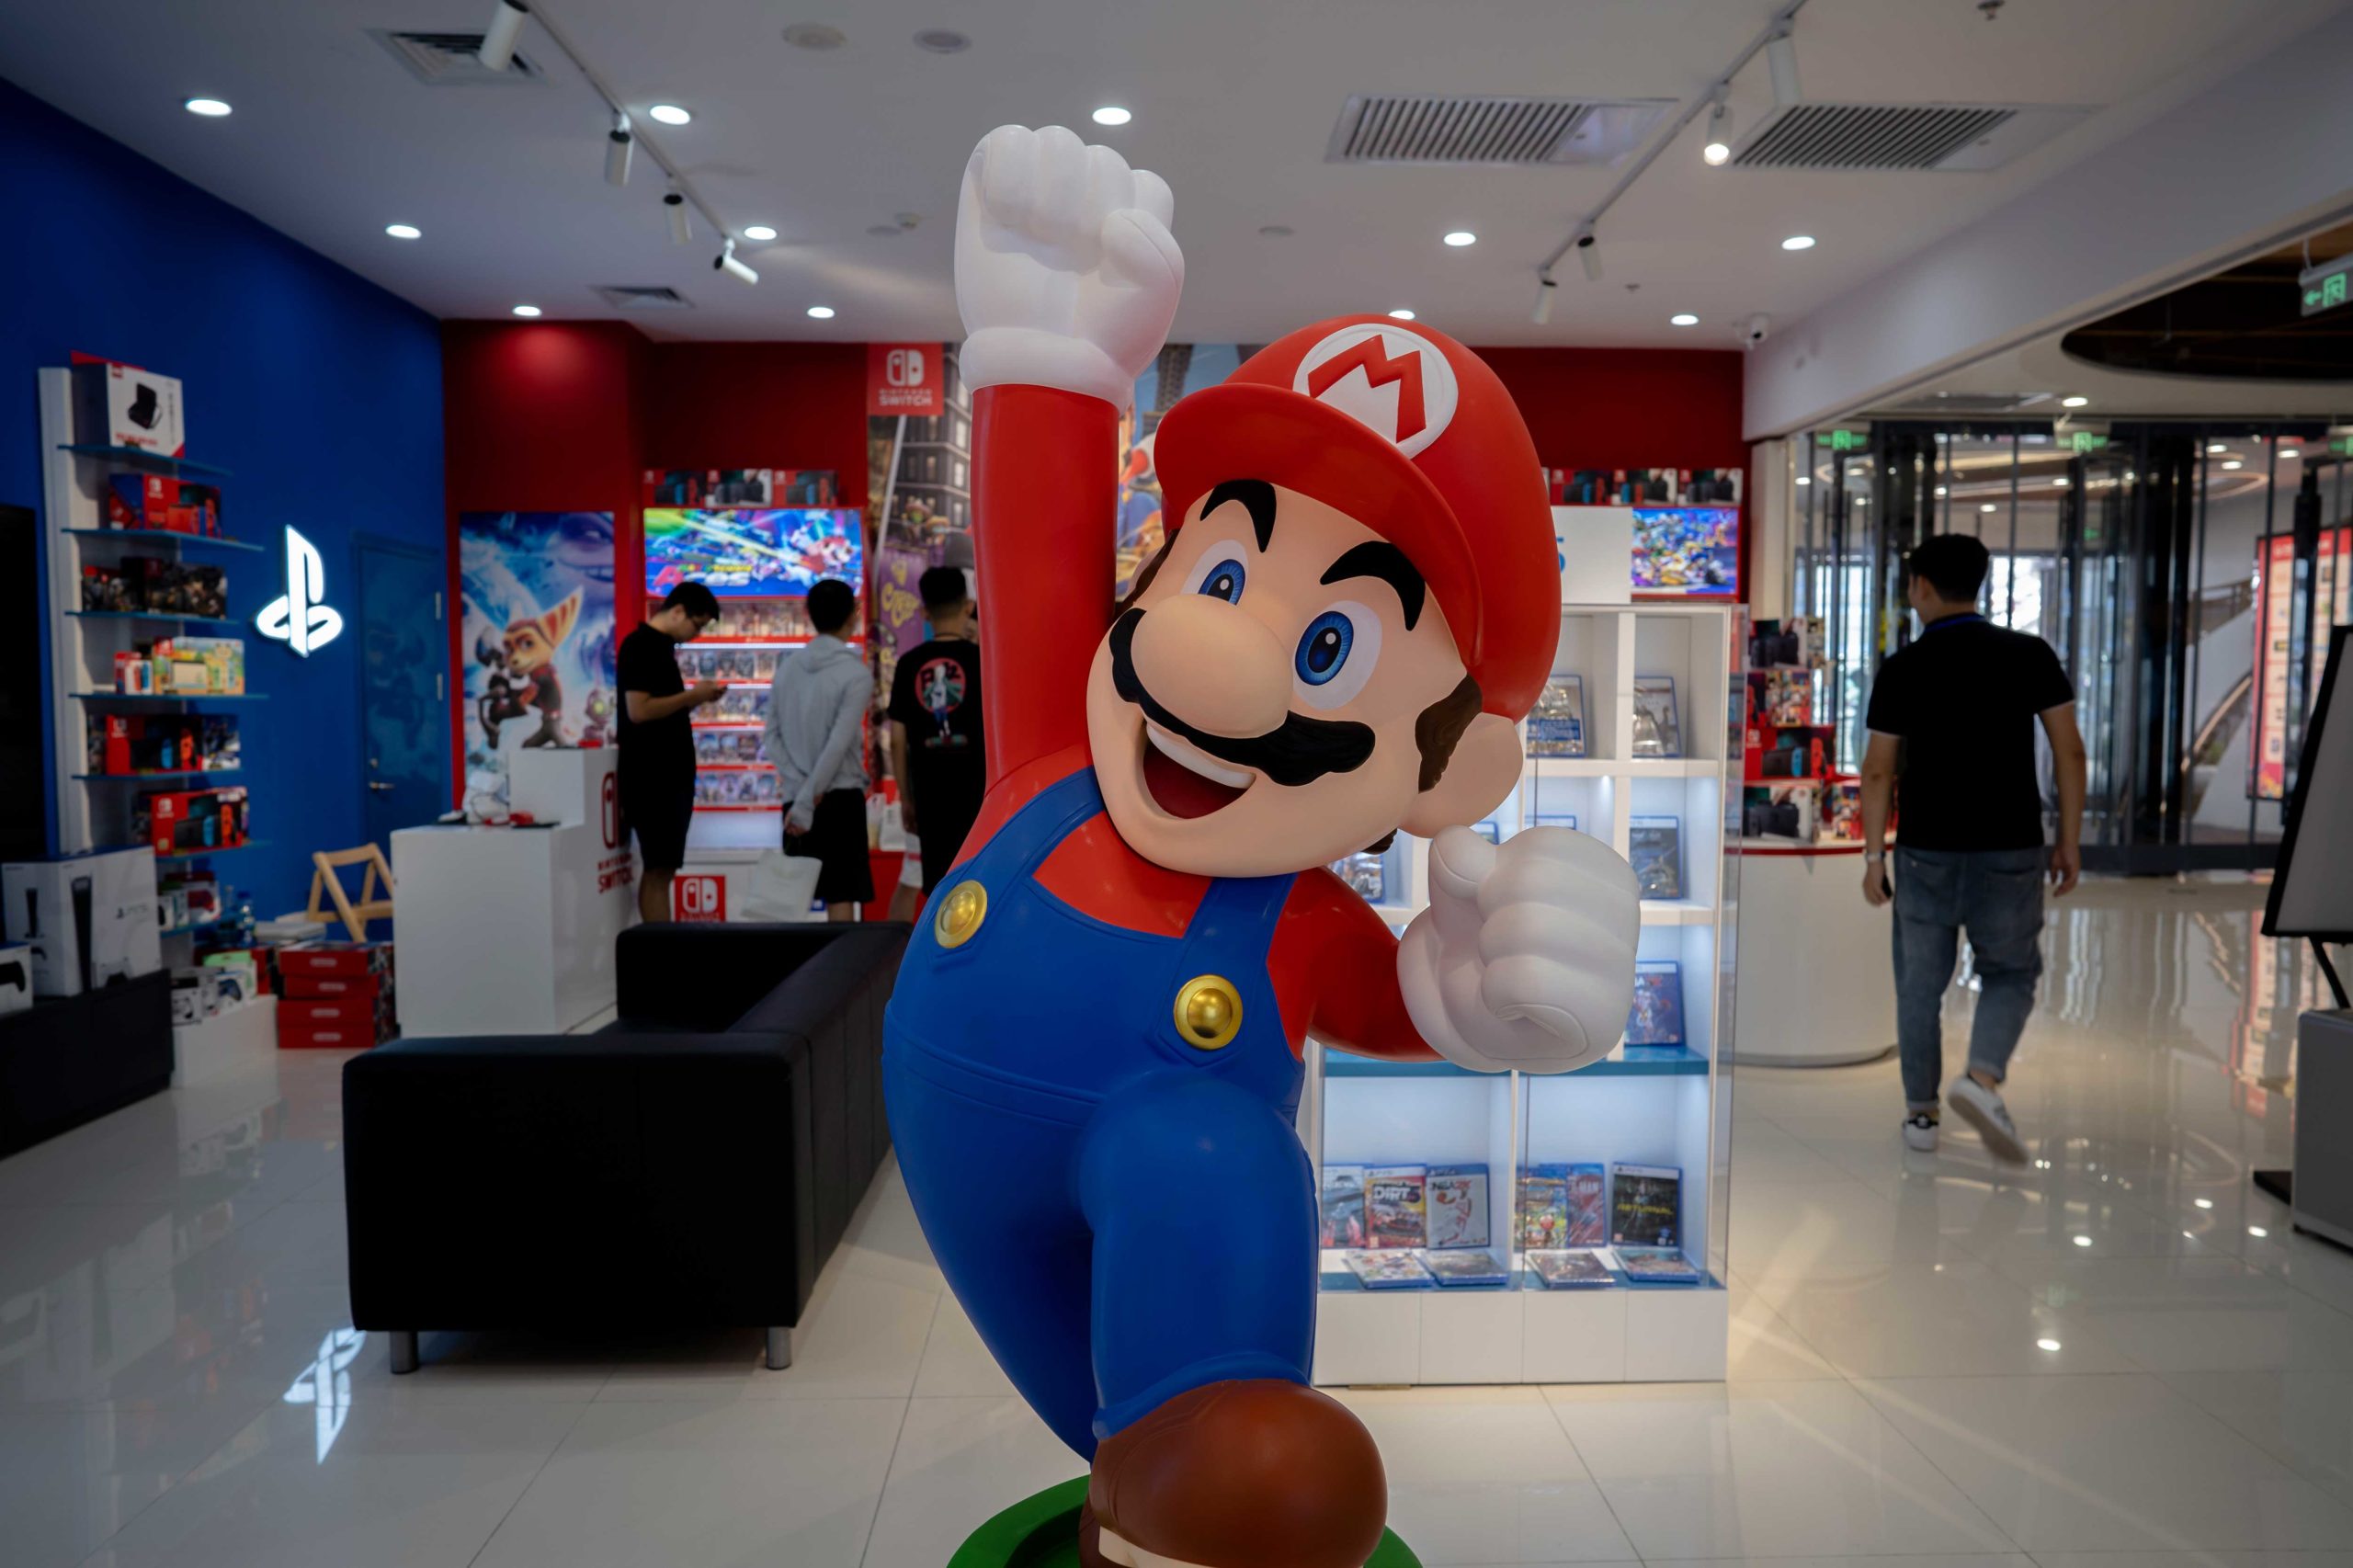 Nintendo Switch surpasses Wii with sales topping 100 million